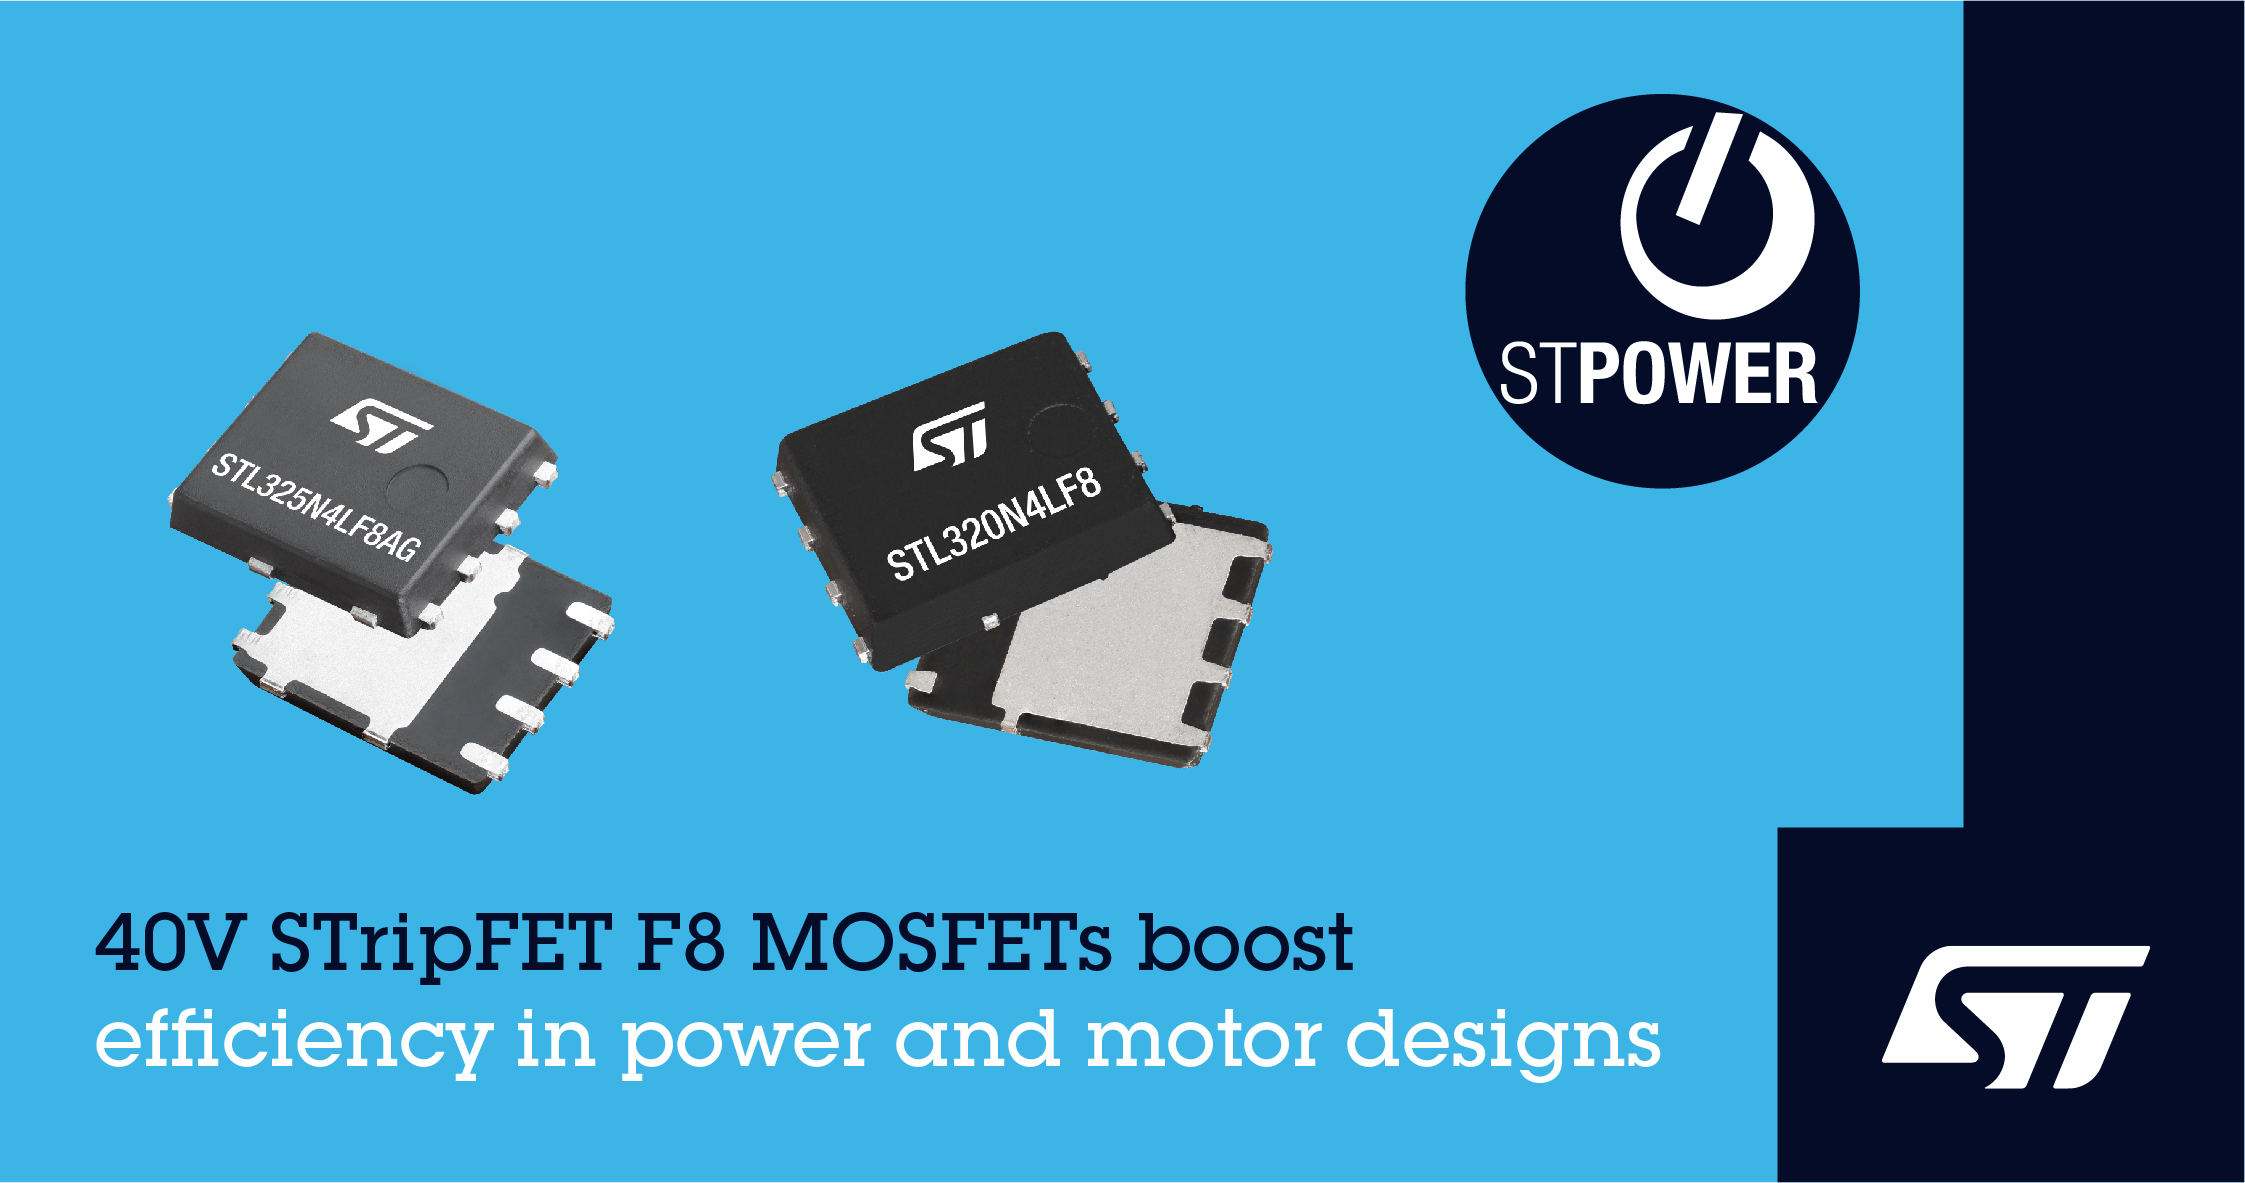 STMicroelectronics’ 40V STripFET F8 MOSFETs save energy and lower noise